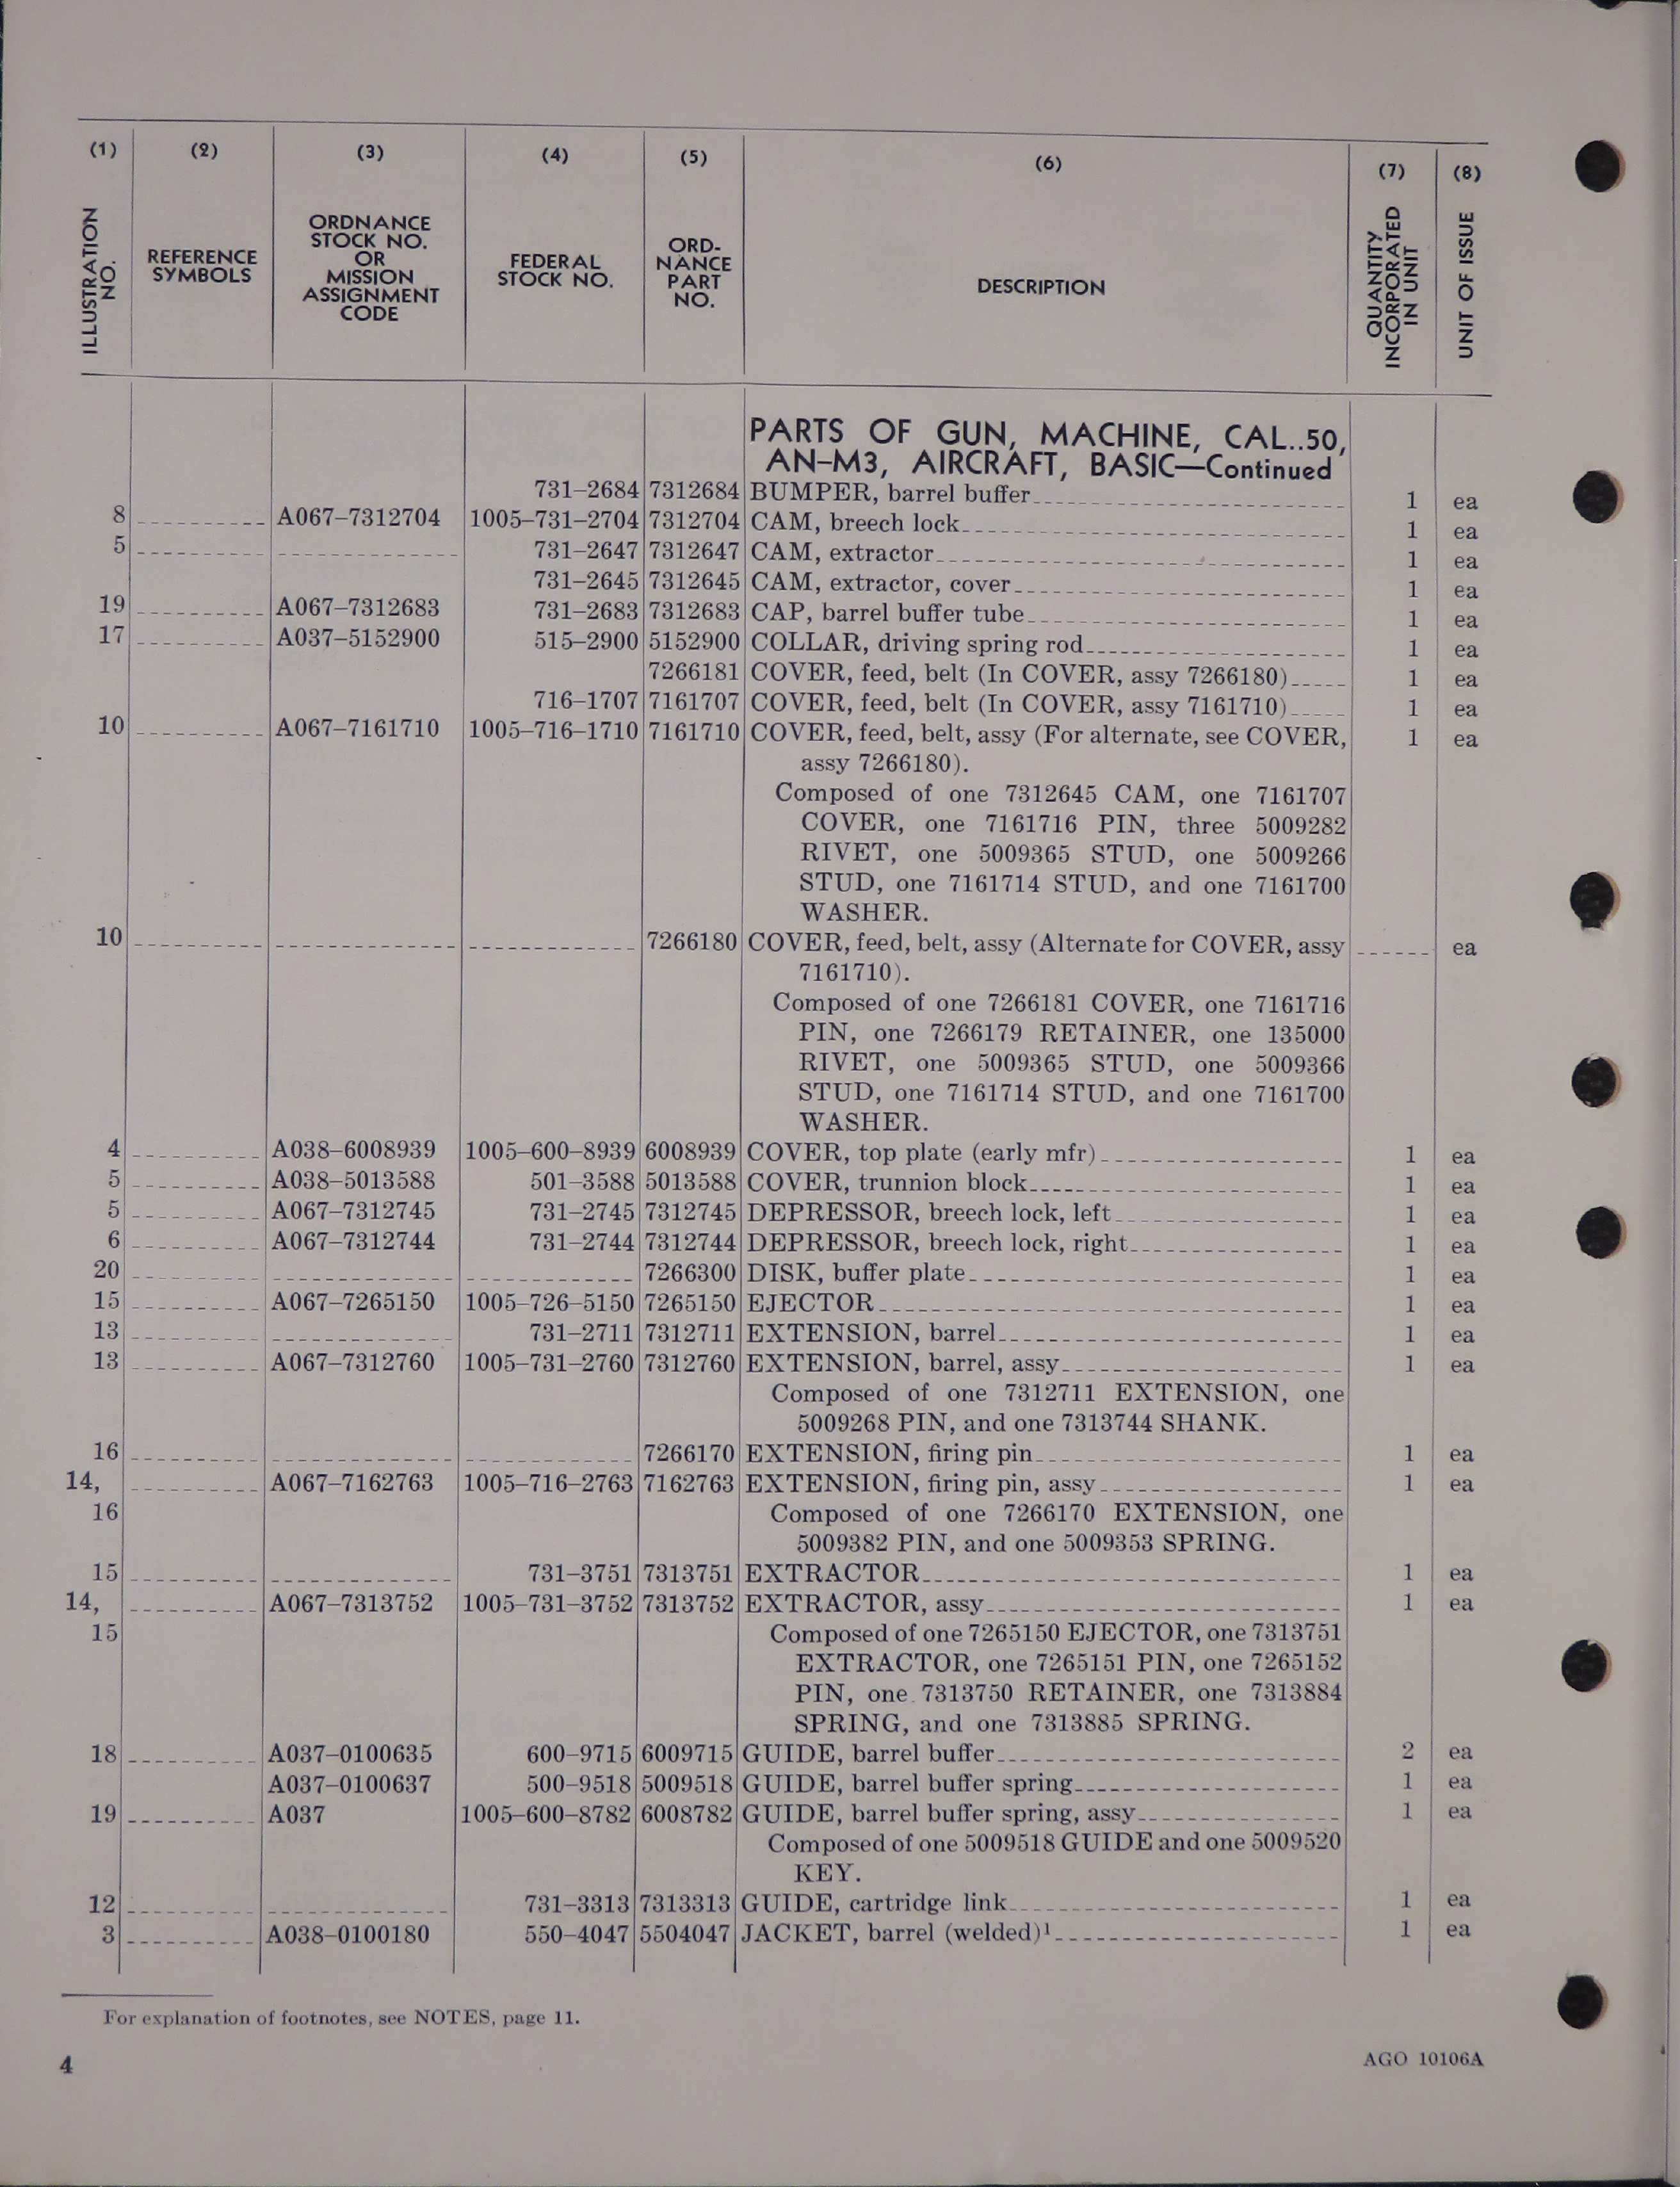 Sample page 6 from AirCorps Library document: List of Serviceable Parts of 50 Cal Machine Gun AN-M3